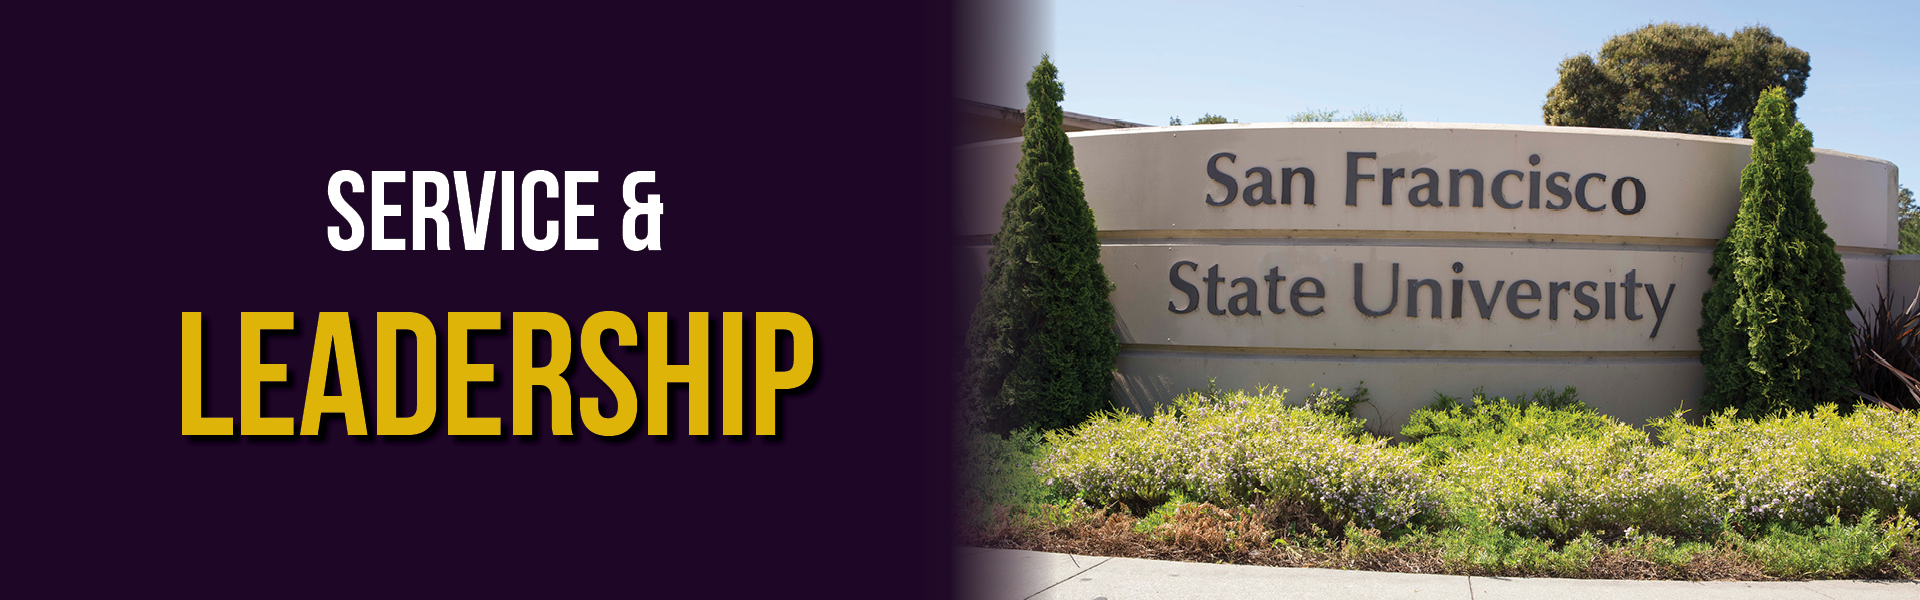 San Francisco State University large sign Service and Leadership